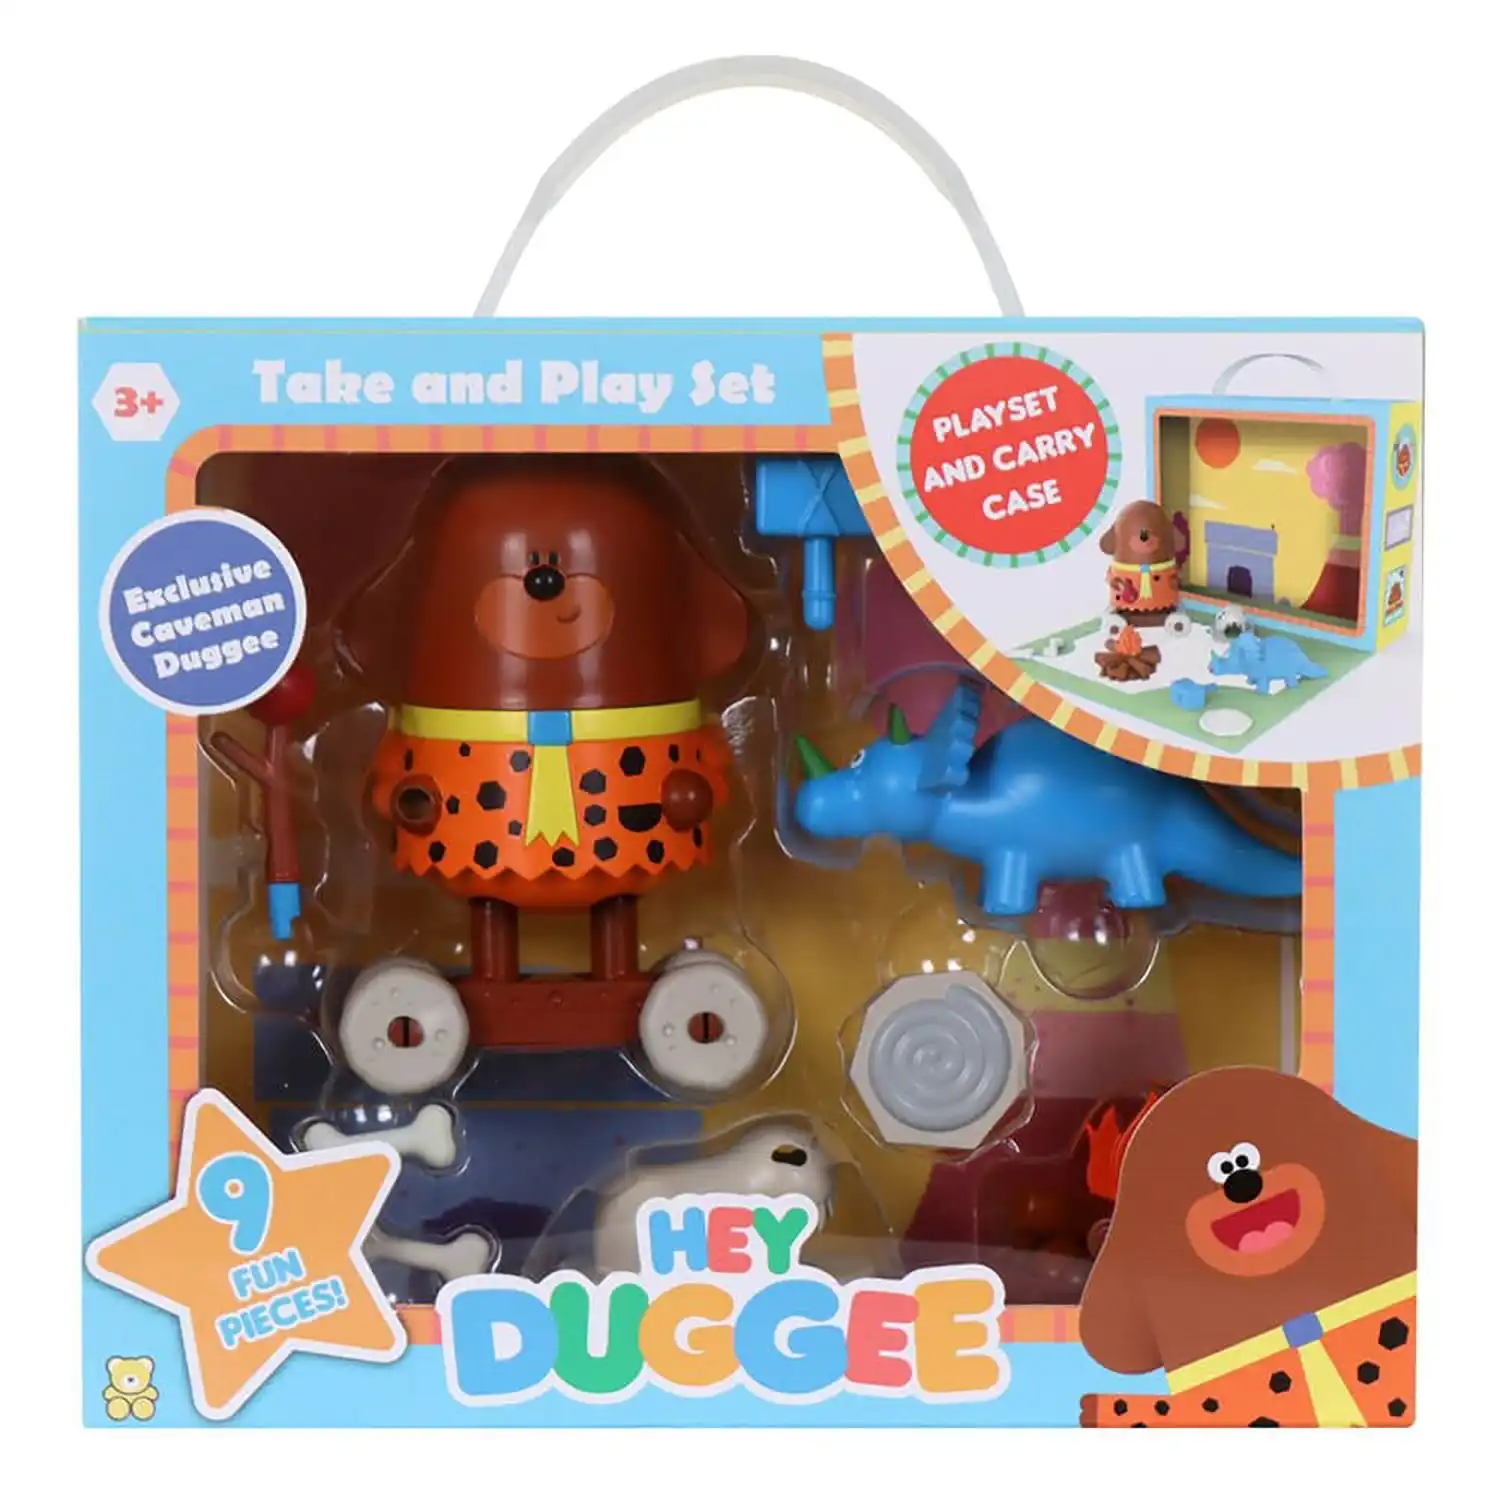 Hey Duggee - Take and Play Set Dinosaurs with Duggee